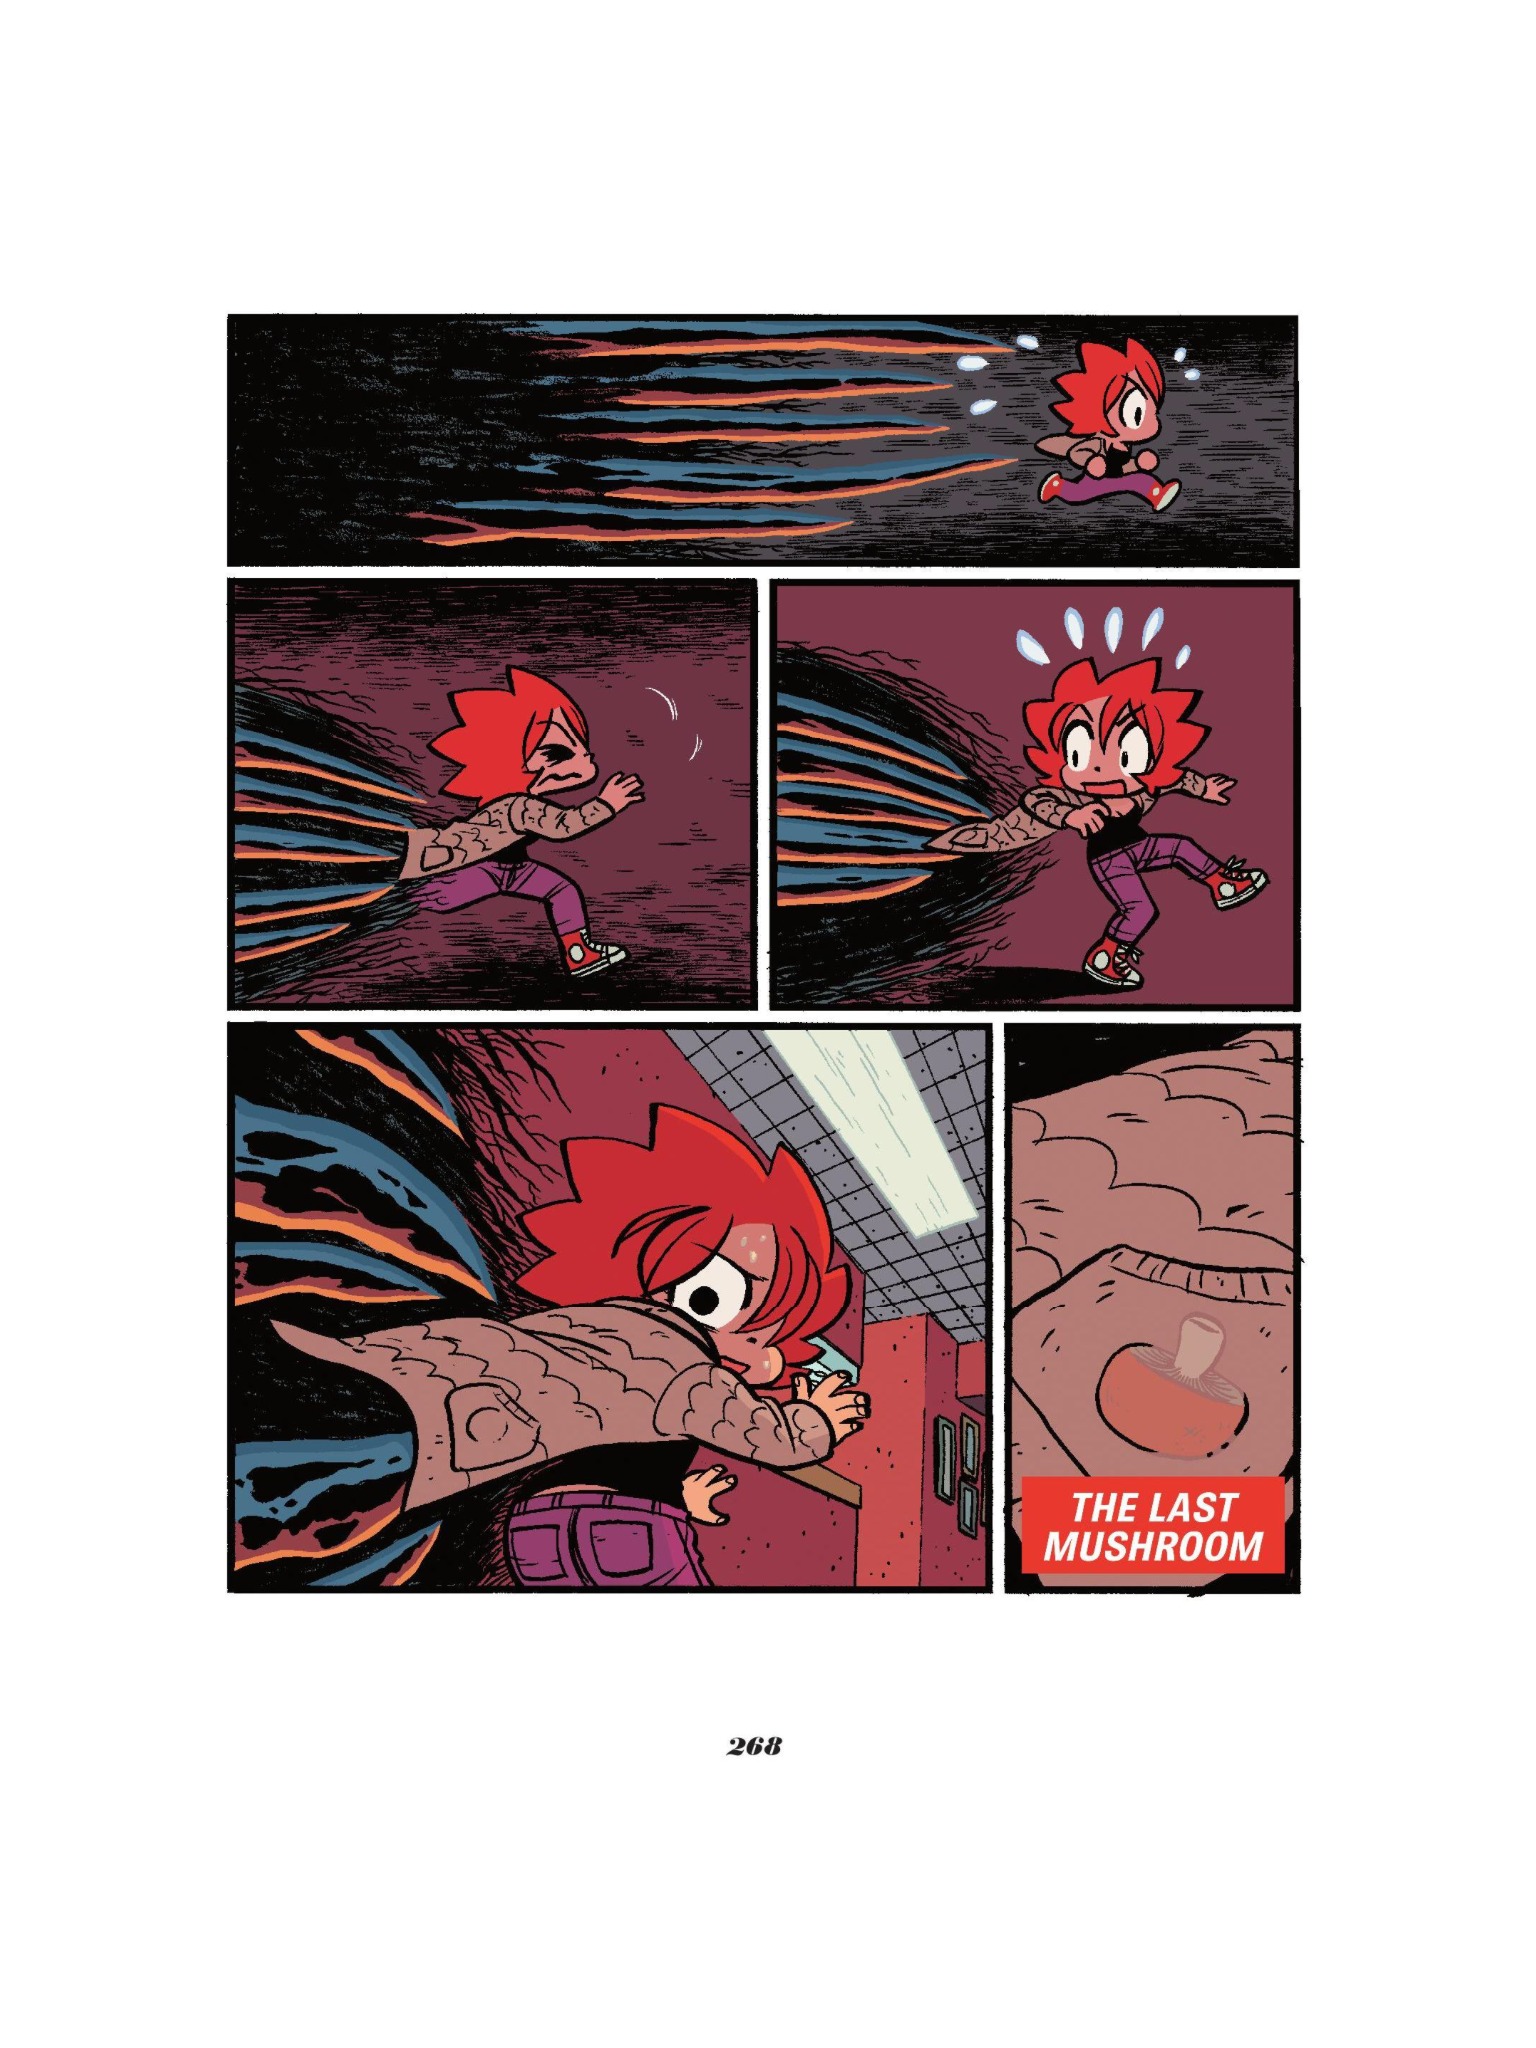 Read online Seconds comic -  Issue # Full - 268